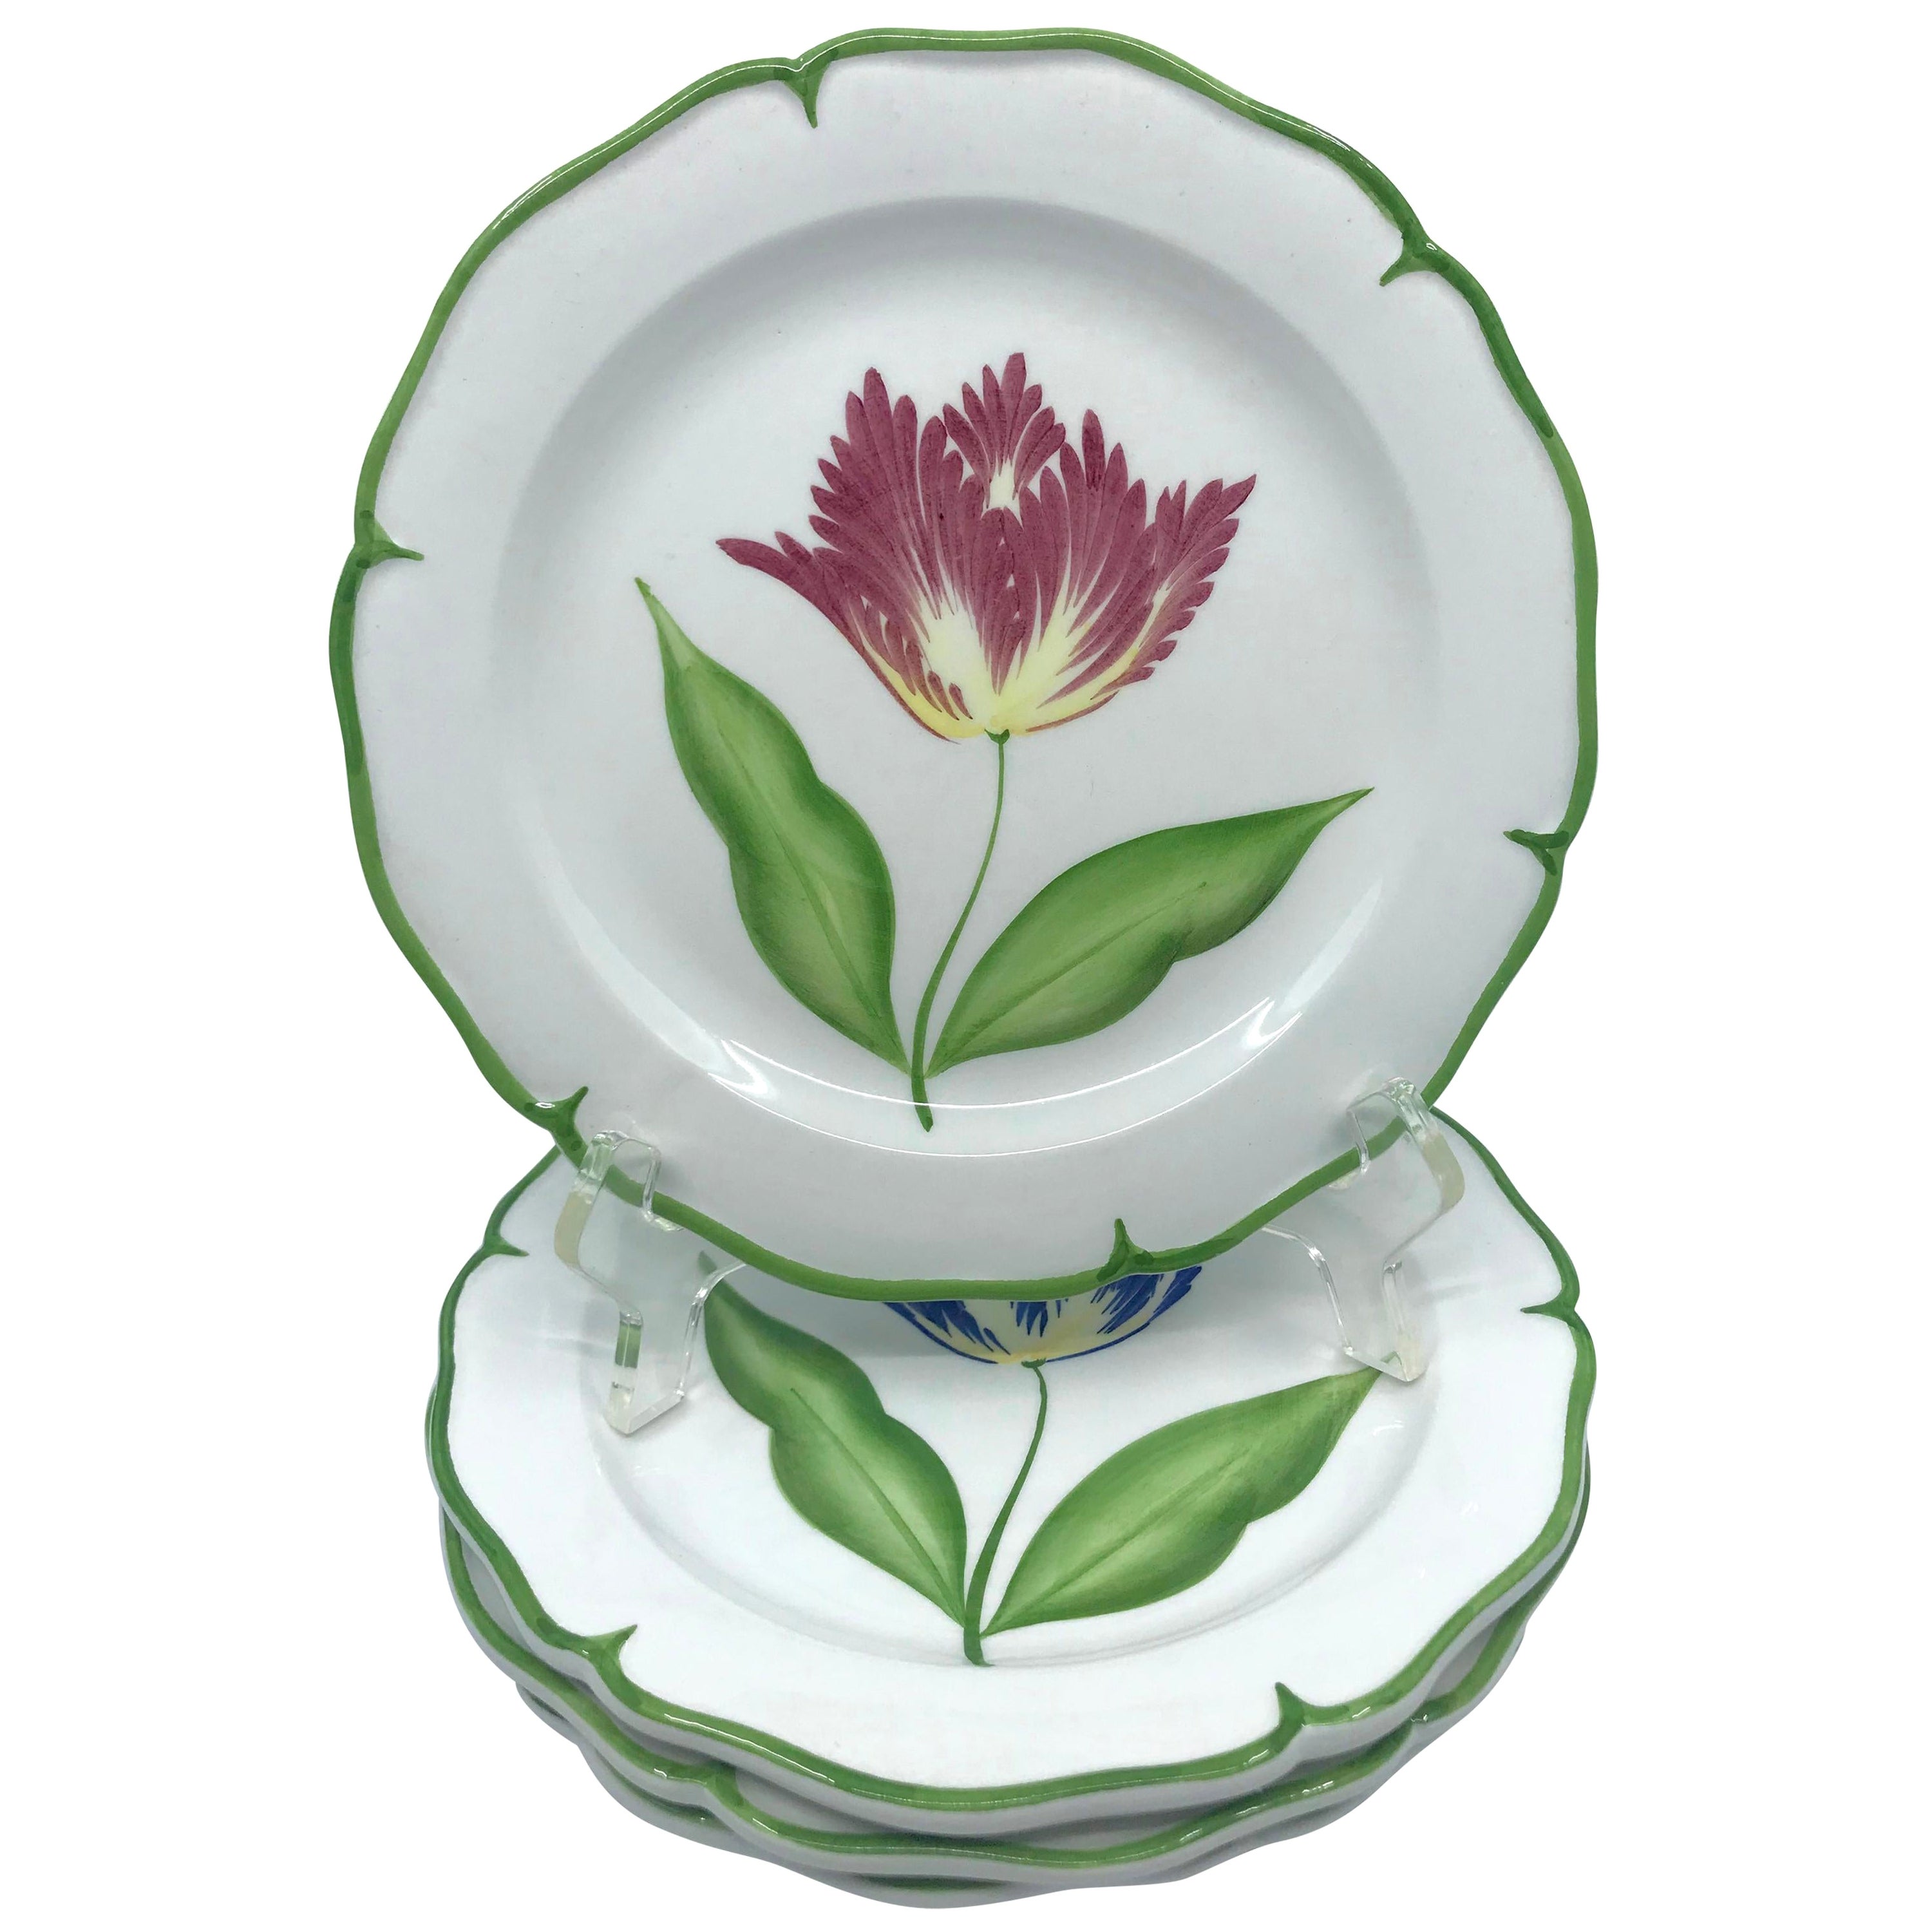 Set of Four Flower Plates with Green Border